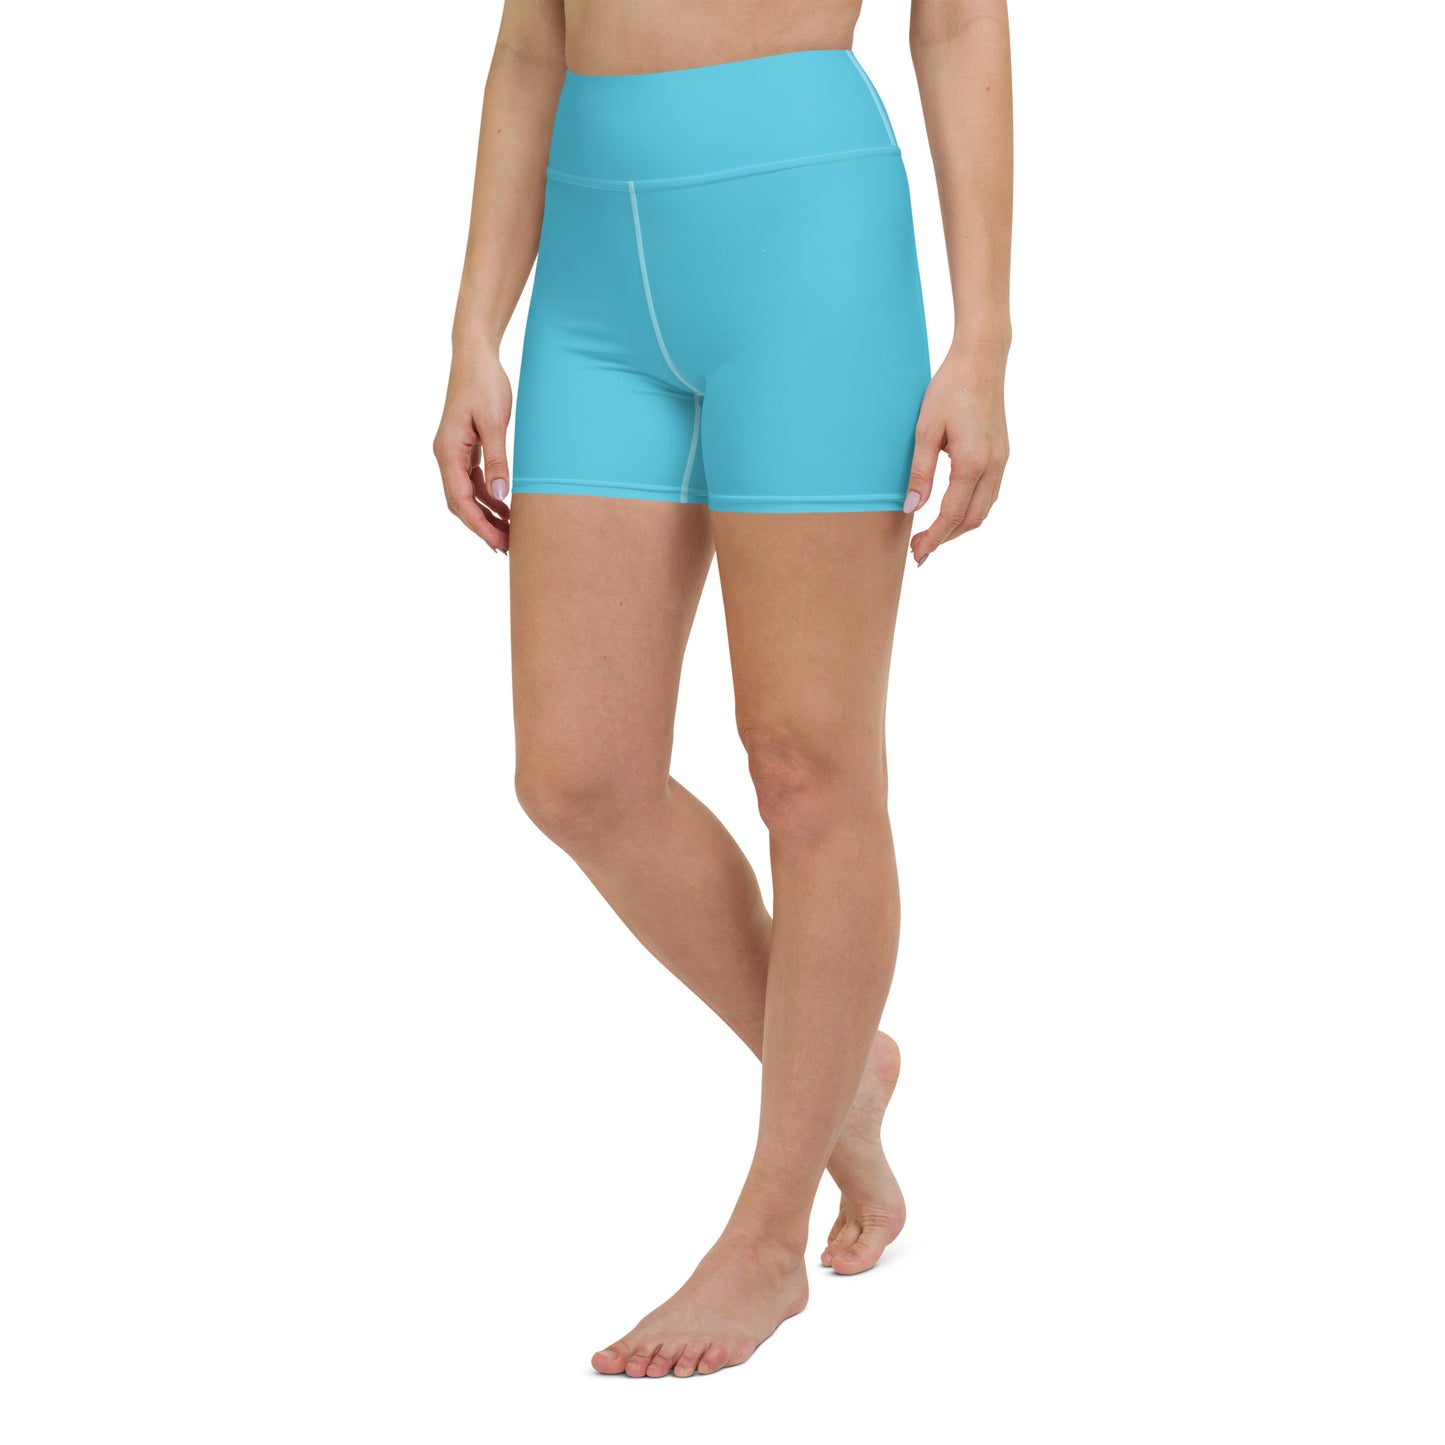 Malocchio Solid Color High Waist Yoga Shorts / Bike Shorts with Inside Pocket